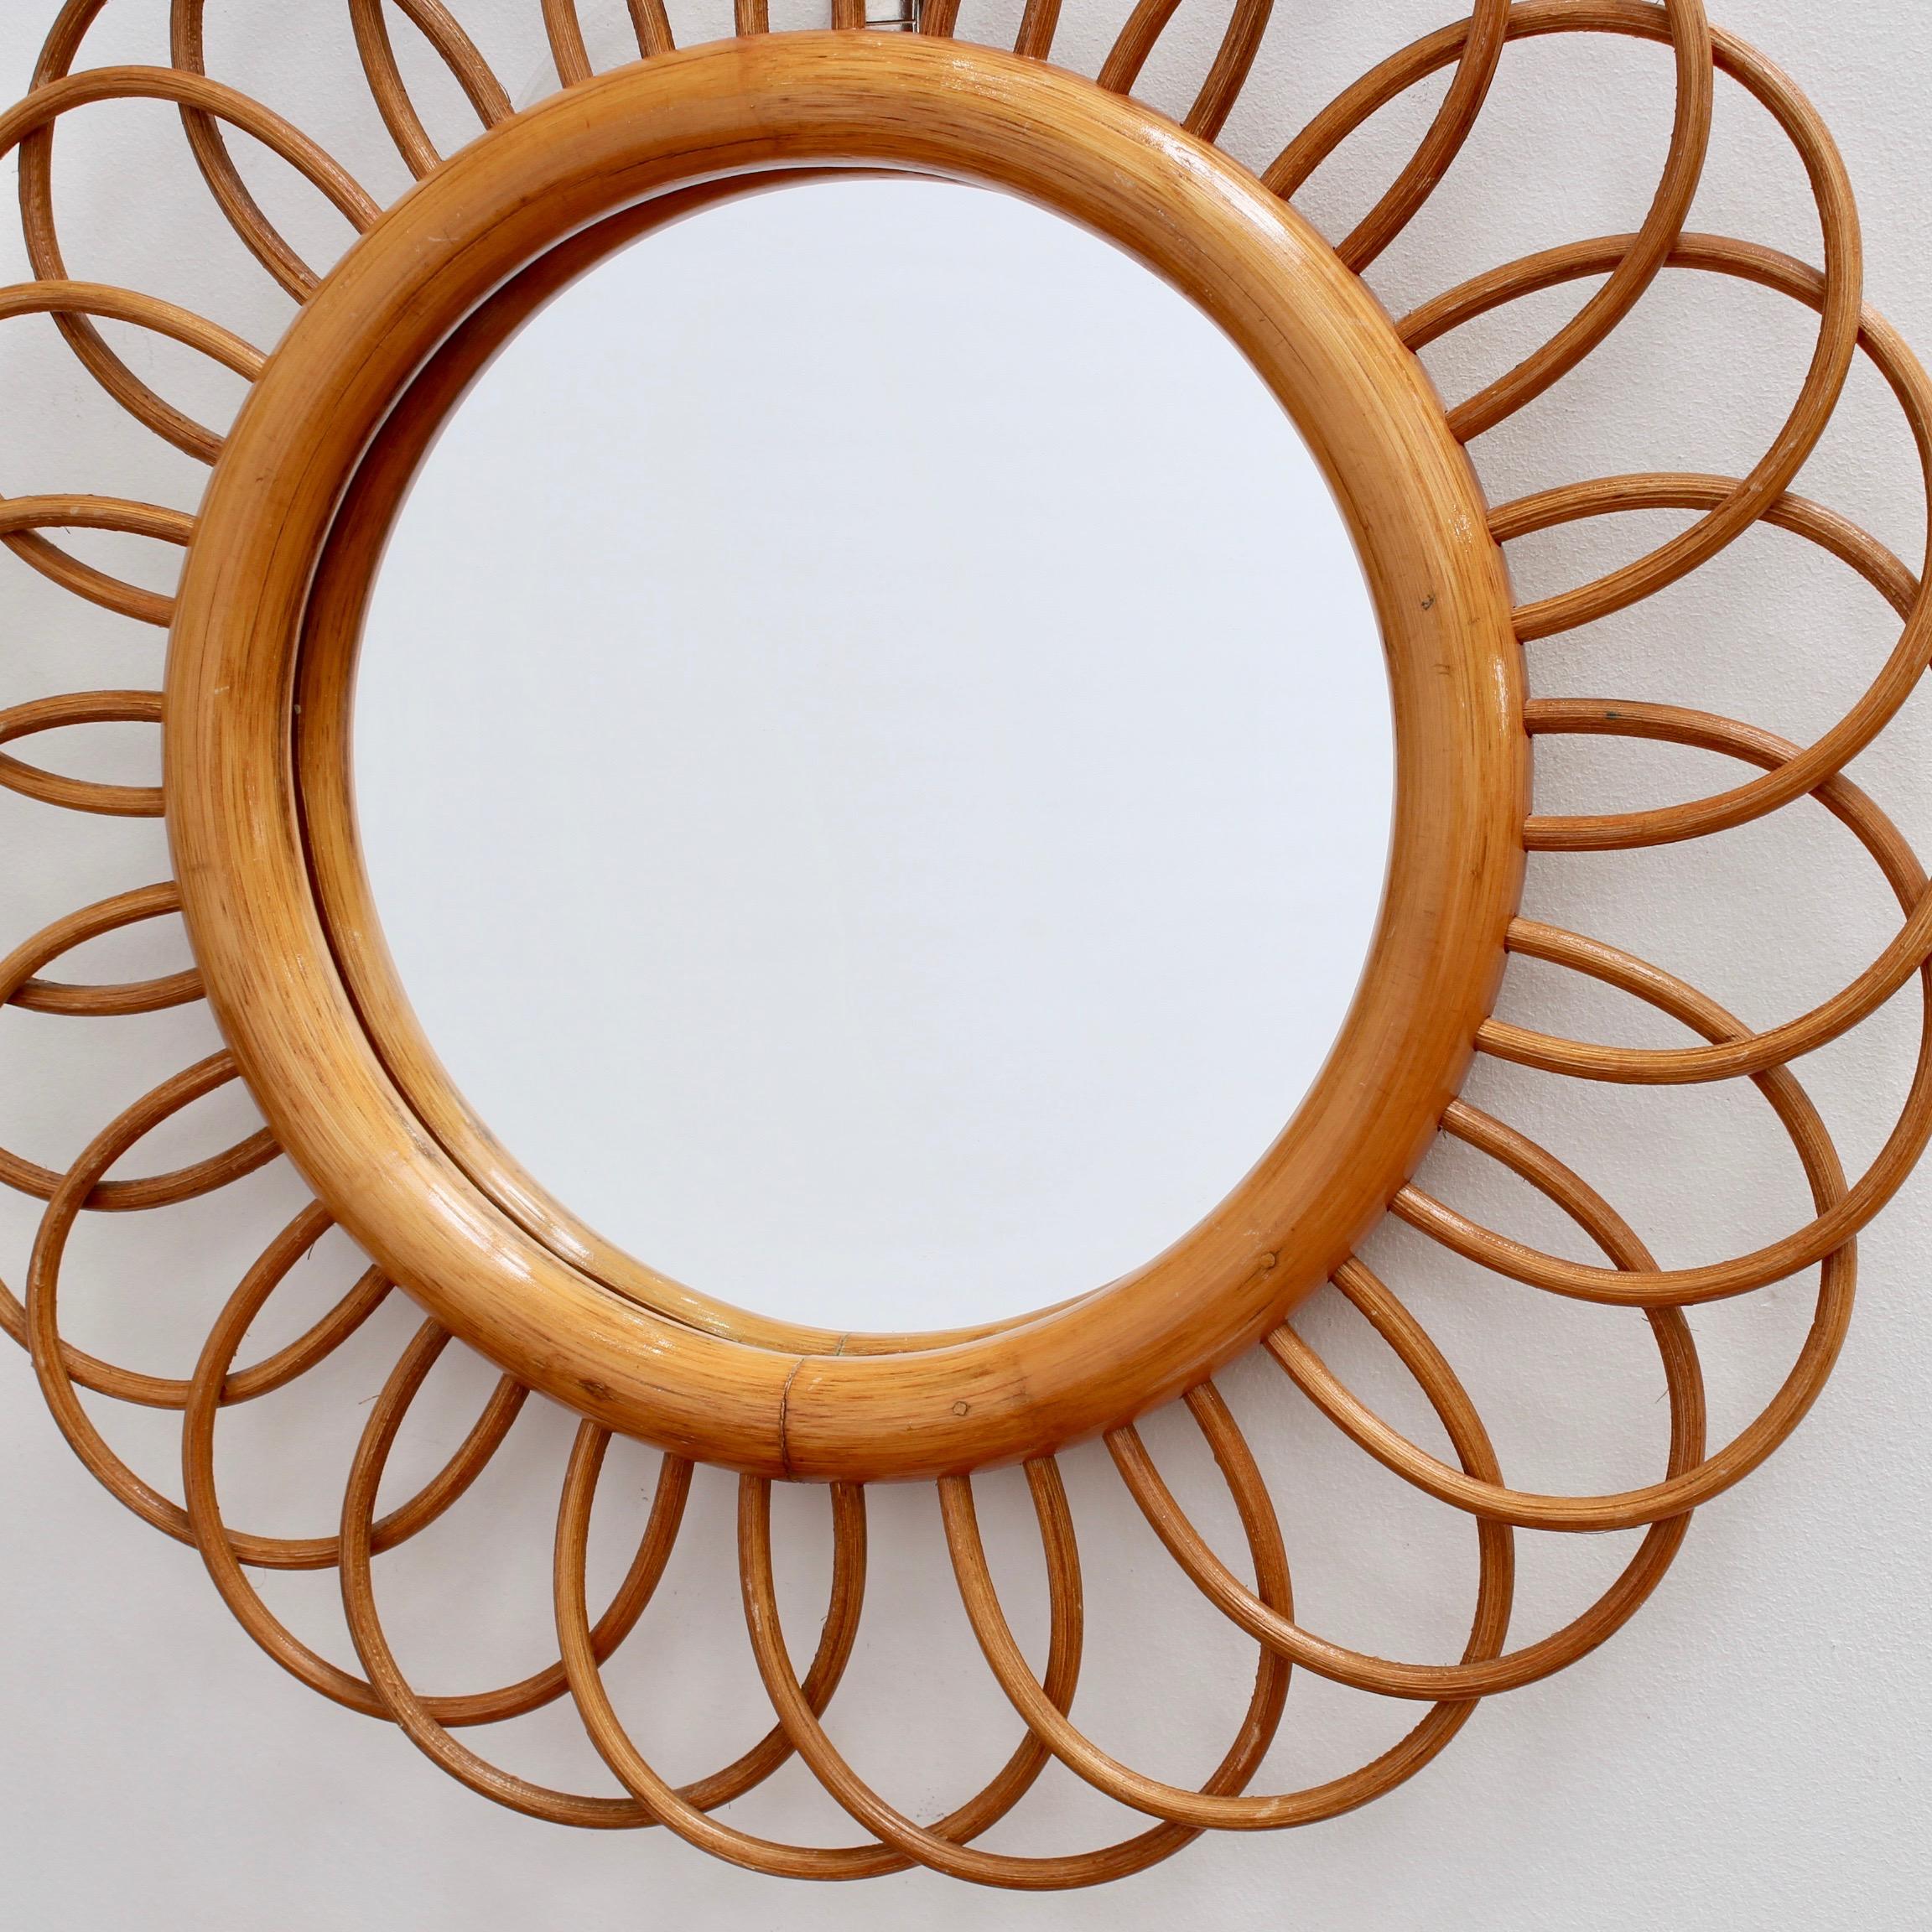 Mid-20th Century Midcentury French Rattan Flower-Shaped Wall Mirror, circa 1960s